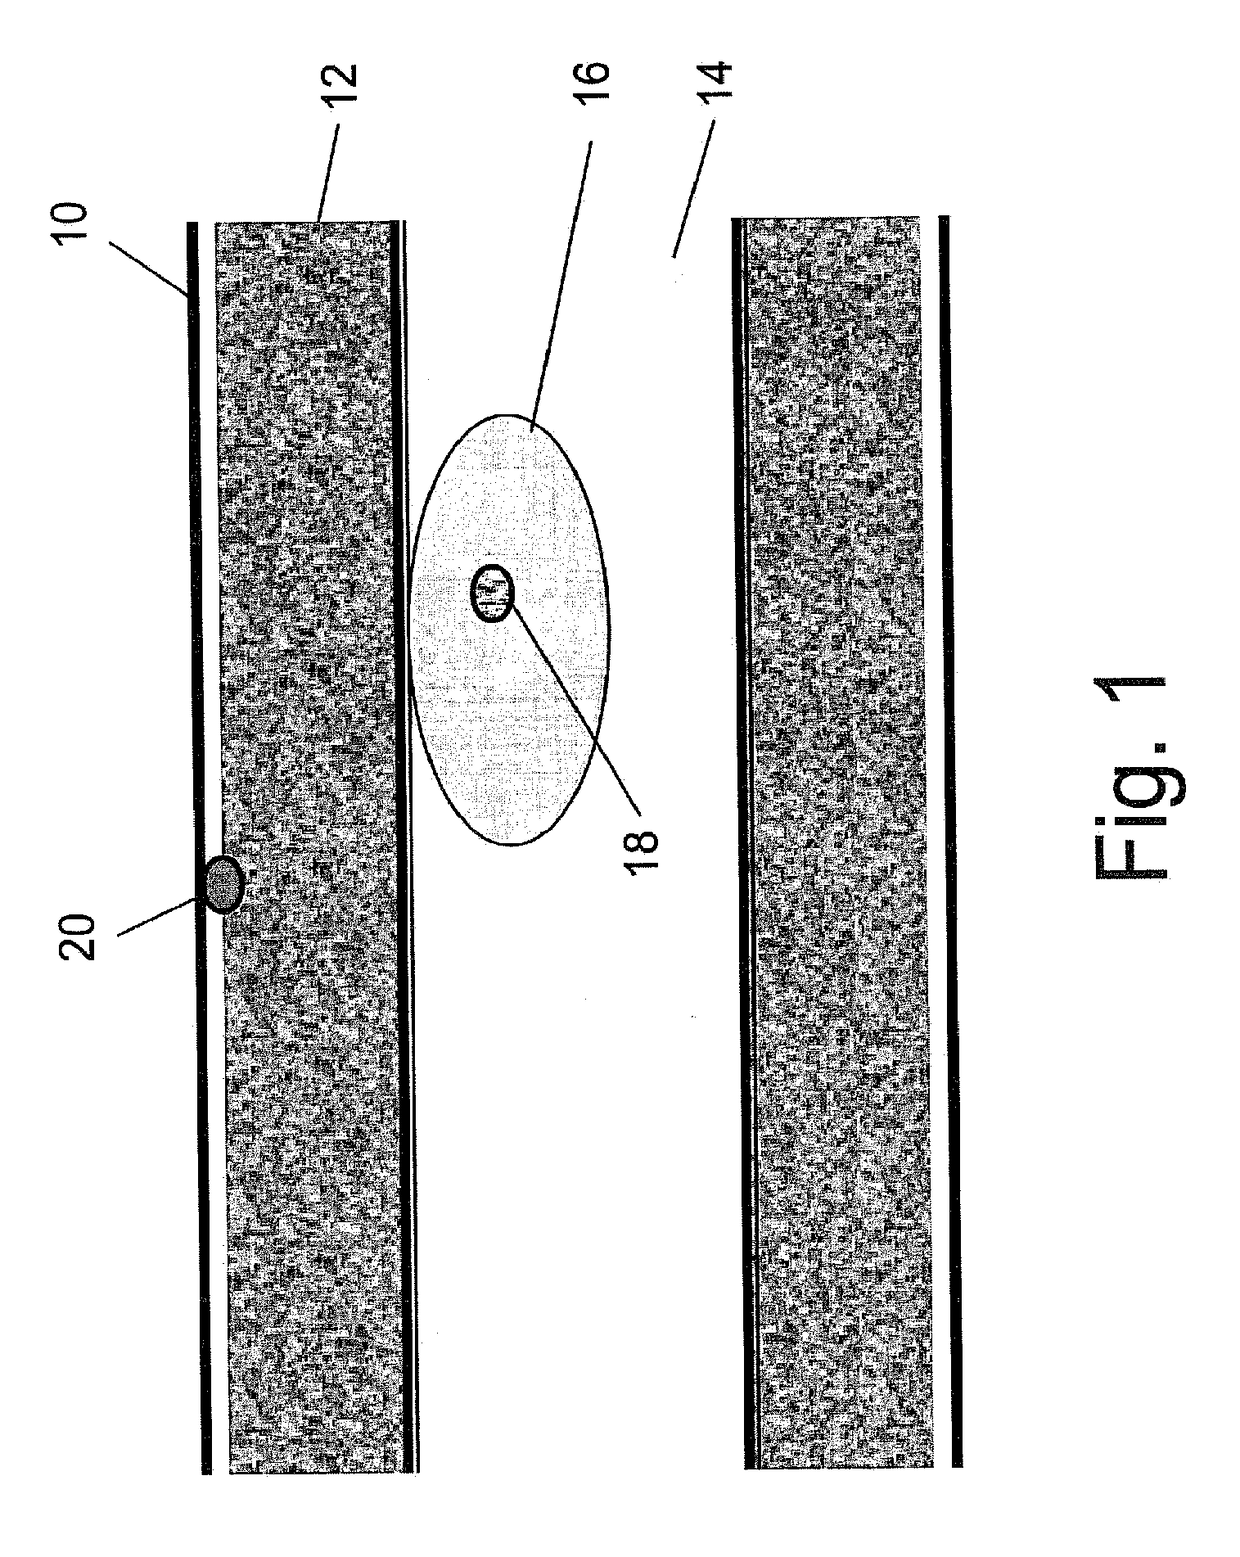 System for implanting, activating, and operating an implantable battery